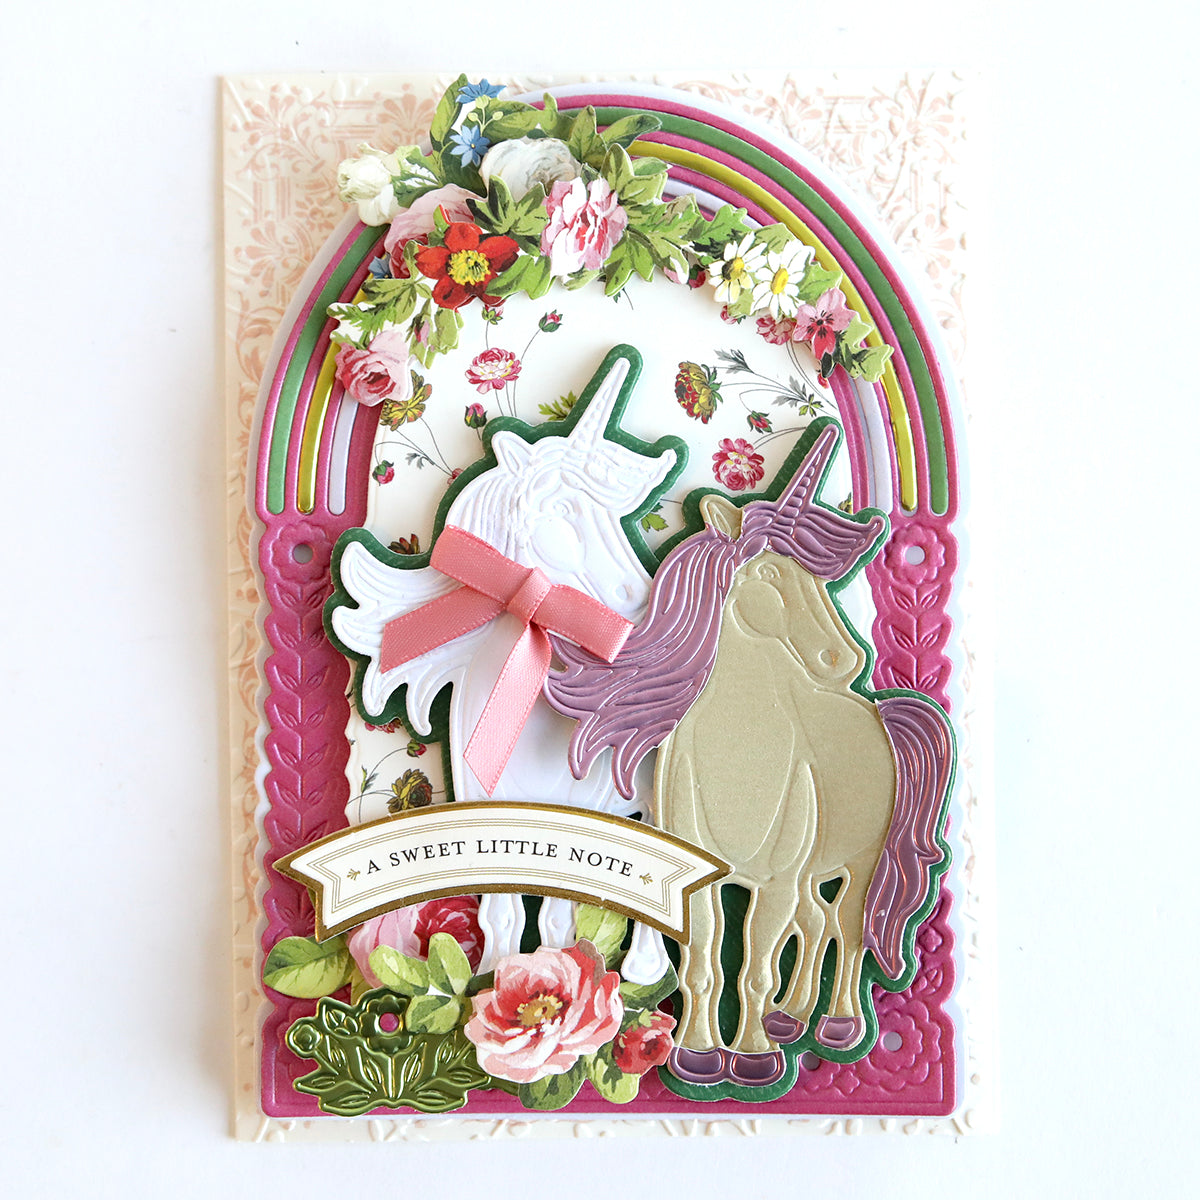 Handmade greeting card featuring 3D Unicorn Scene Dies and floral motifs with a pastel color palette and a ribbon, accompanied by the text "a sweet little note" created using the Anna Griffin Empress Machine.